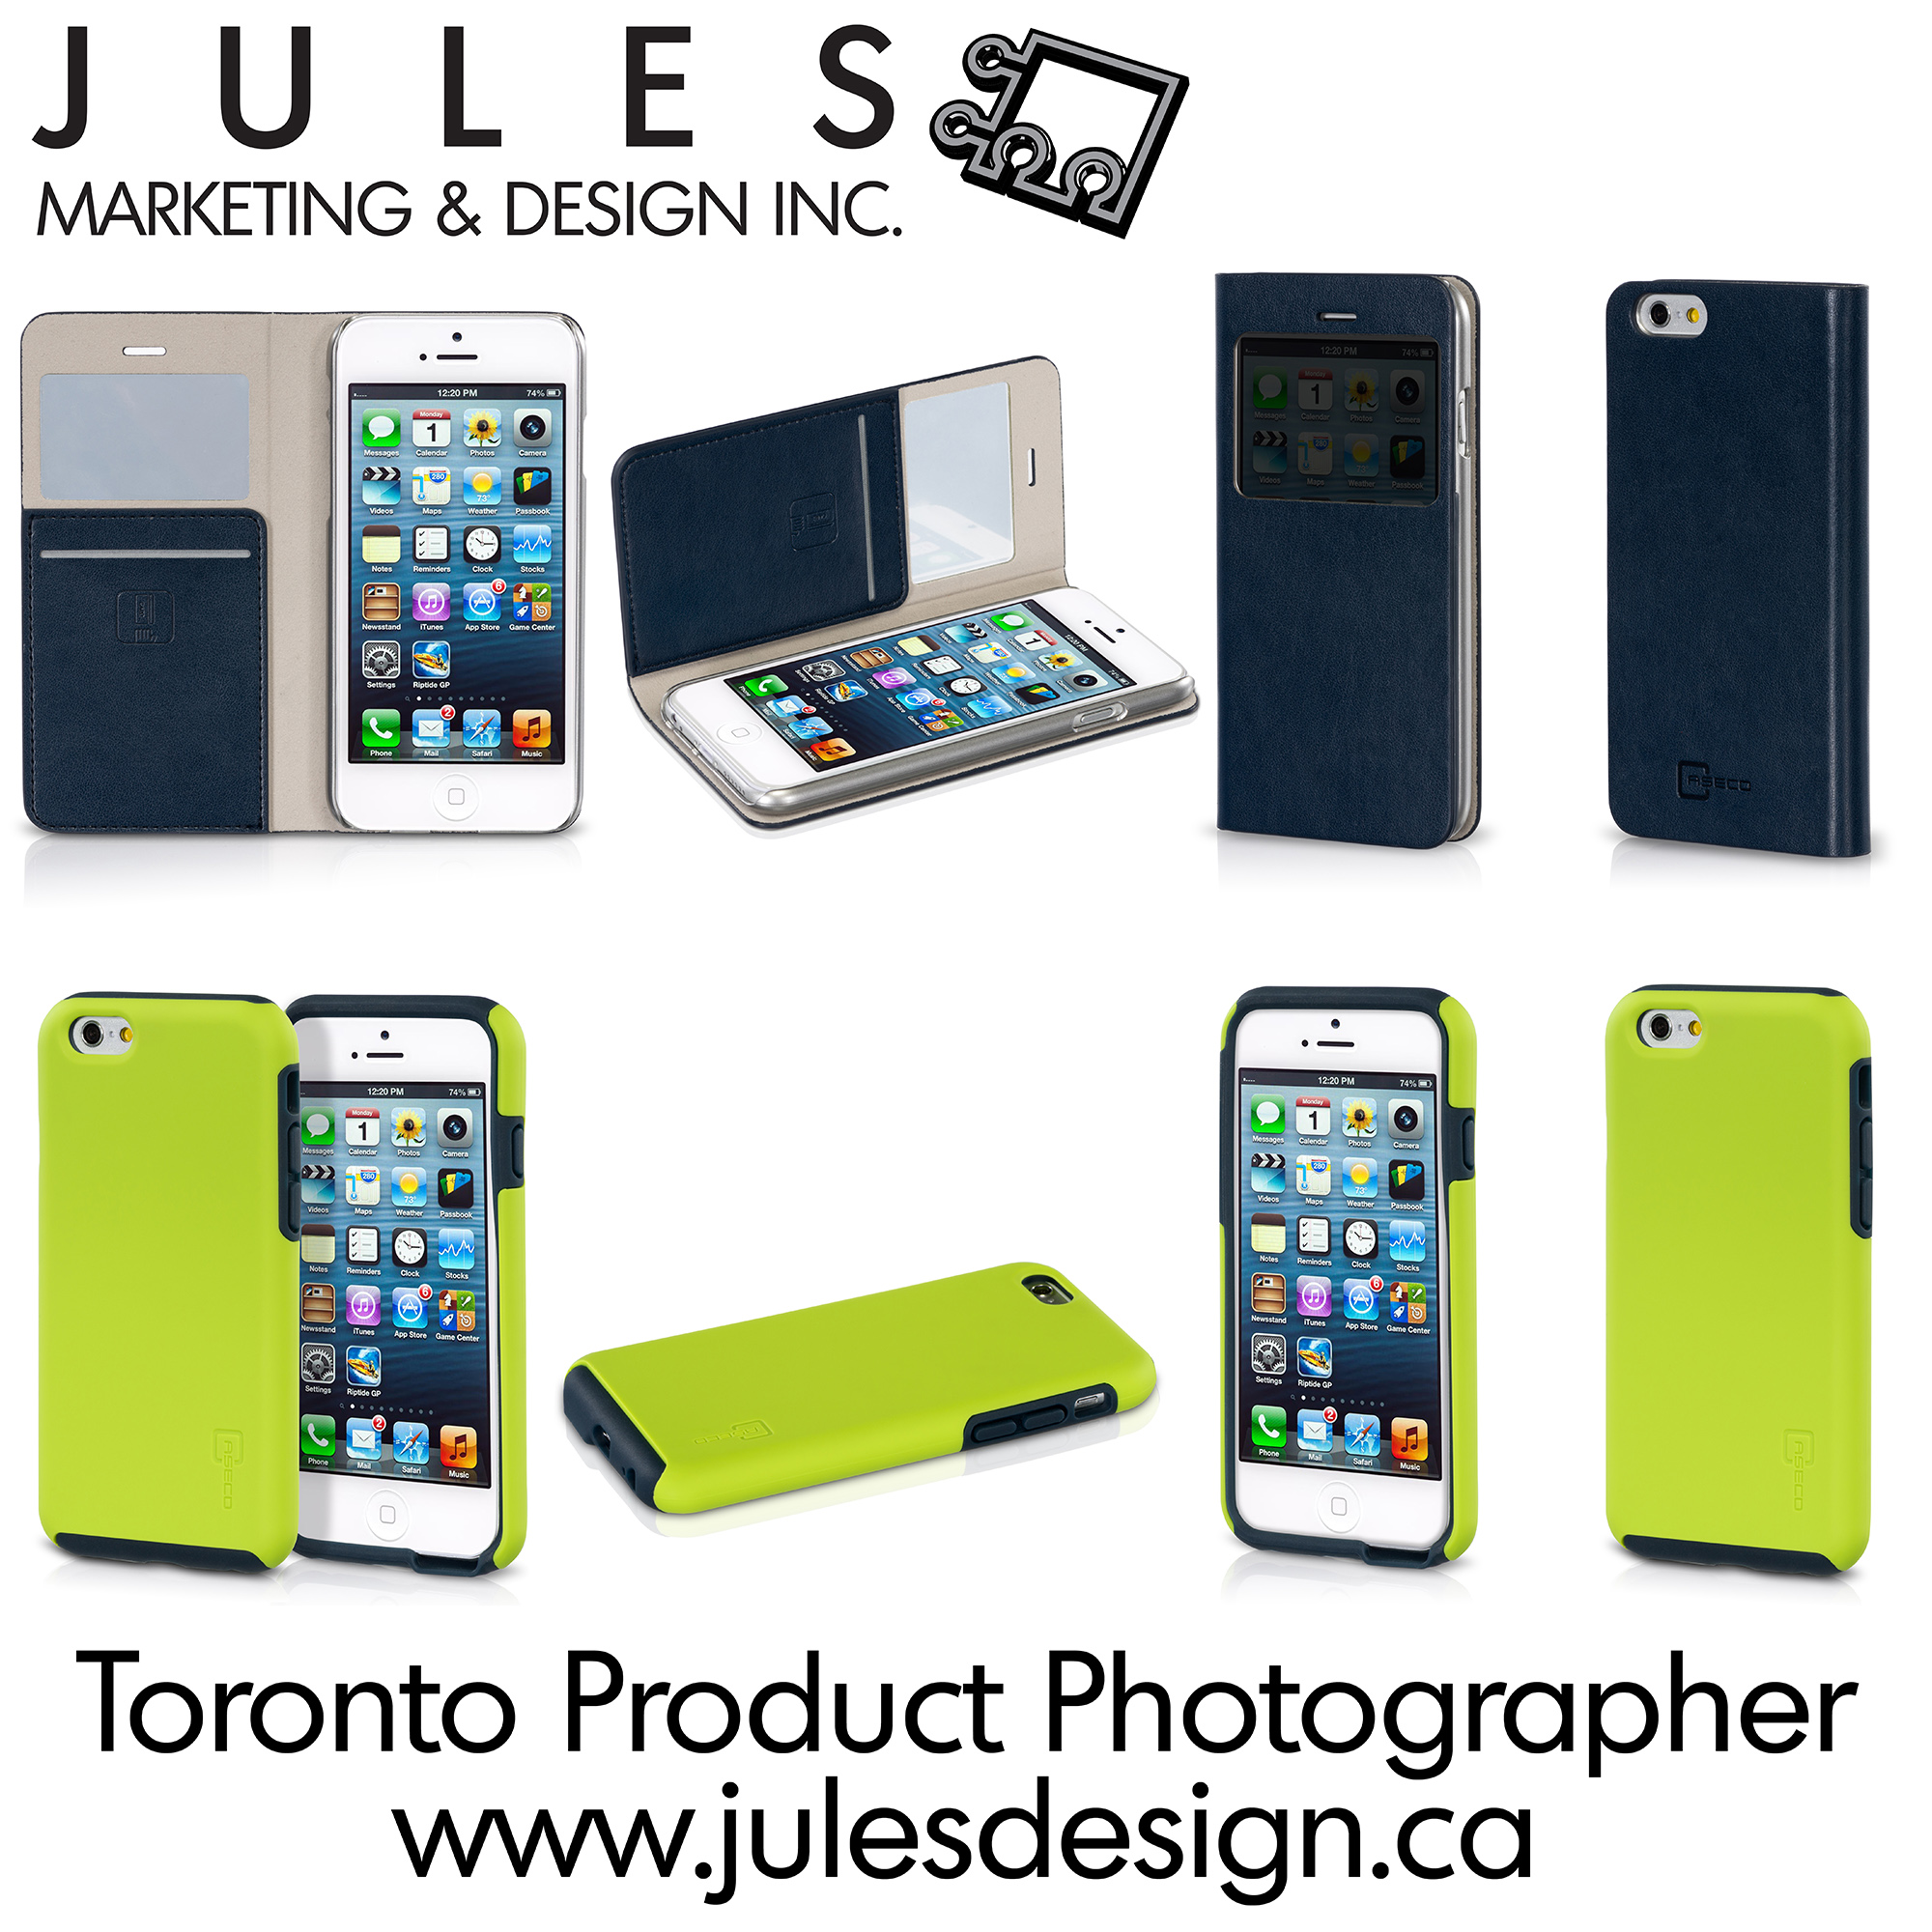 Cell Phone Accessory CPG and Consumer Good Toronto Product Photography